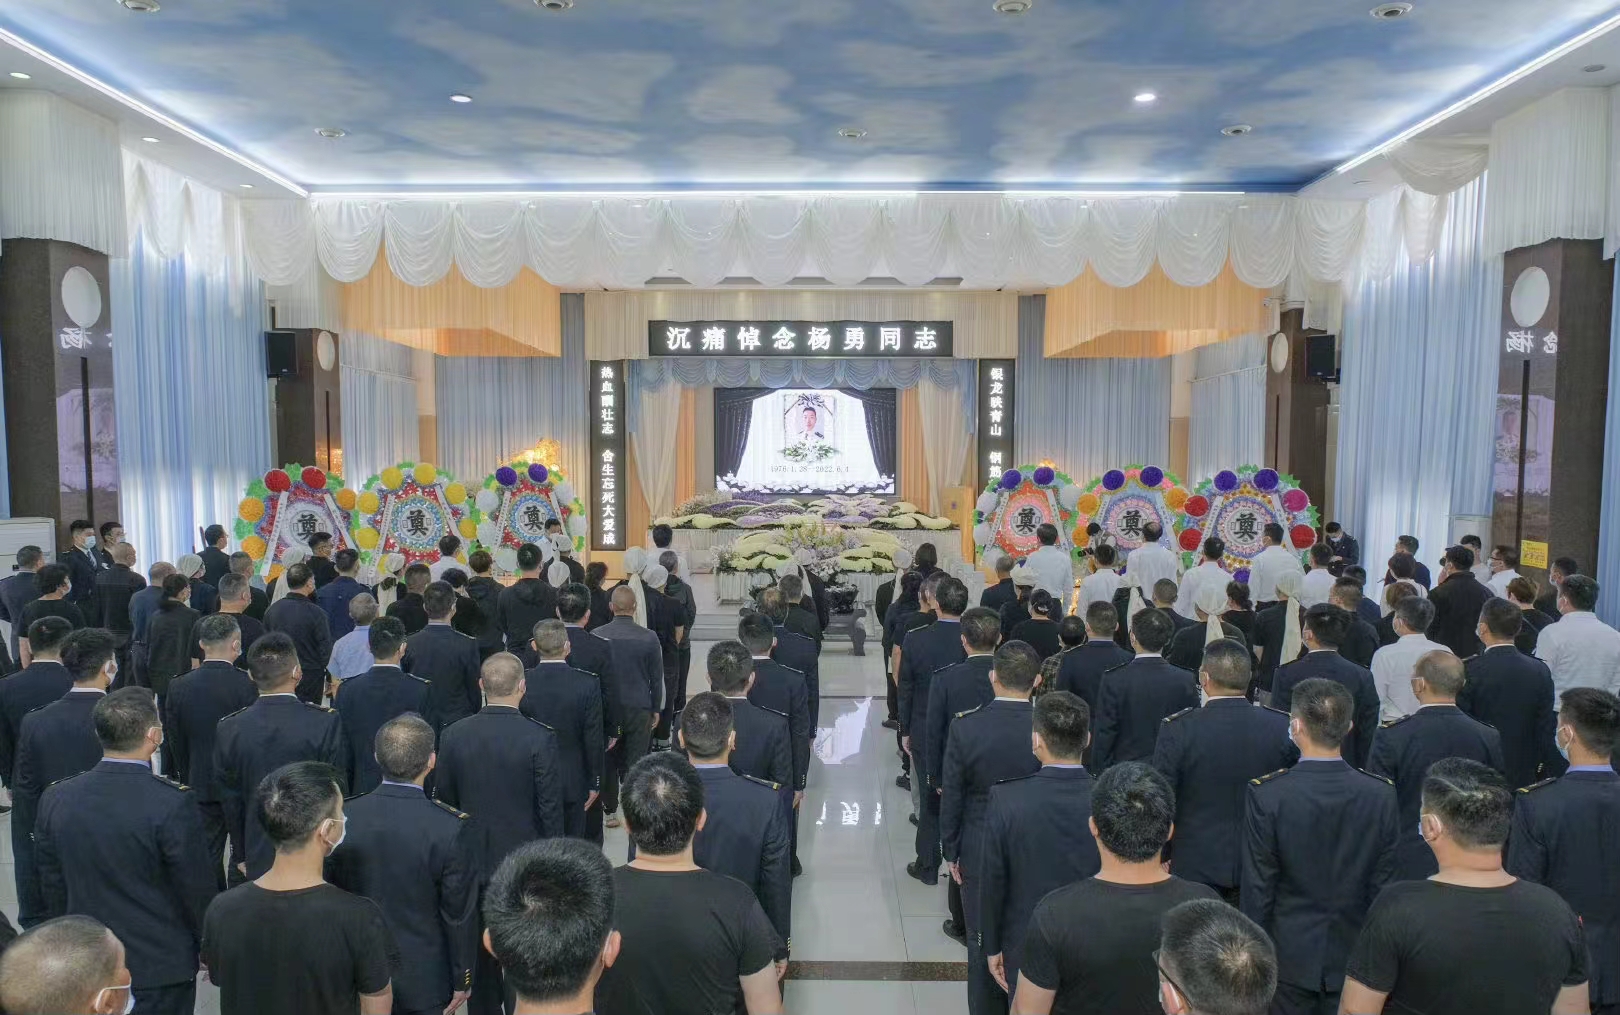 A funeral ceremony for Yang Yong, the hero driver of a derailed bullet train D2809 killed on duty, was held Tuesday at a funeral parlor in his hometown of Zunyi, a city in Southwest China’s Guizhou Province. Source: Sina Weibo